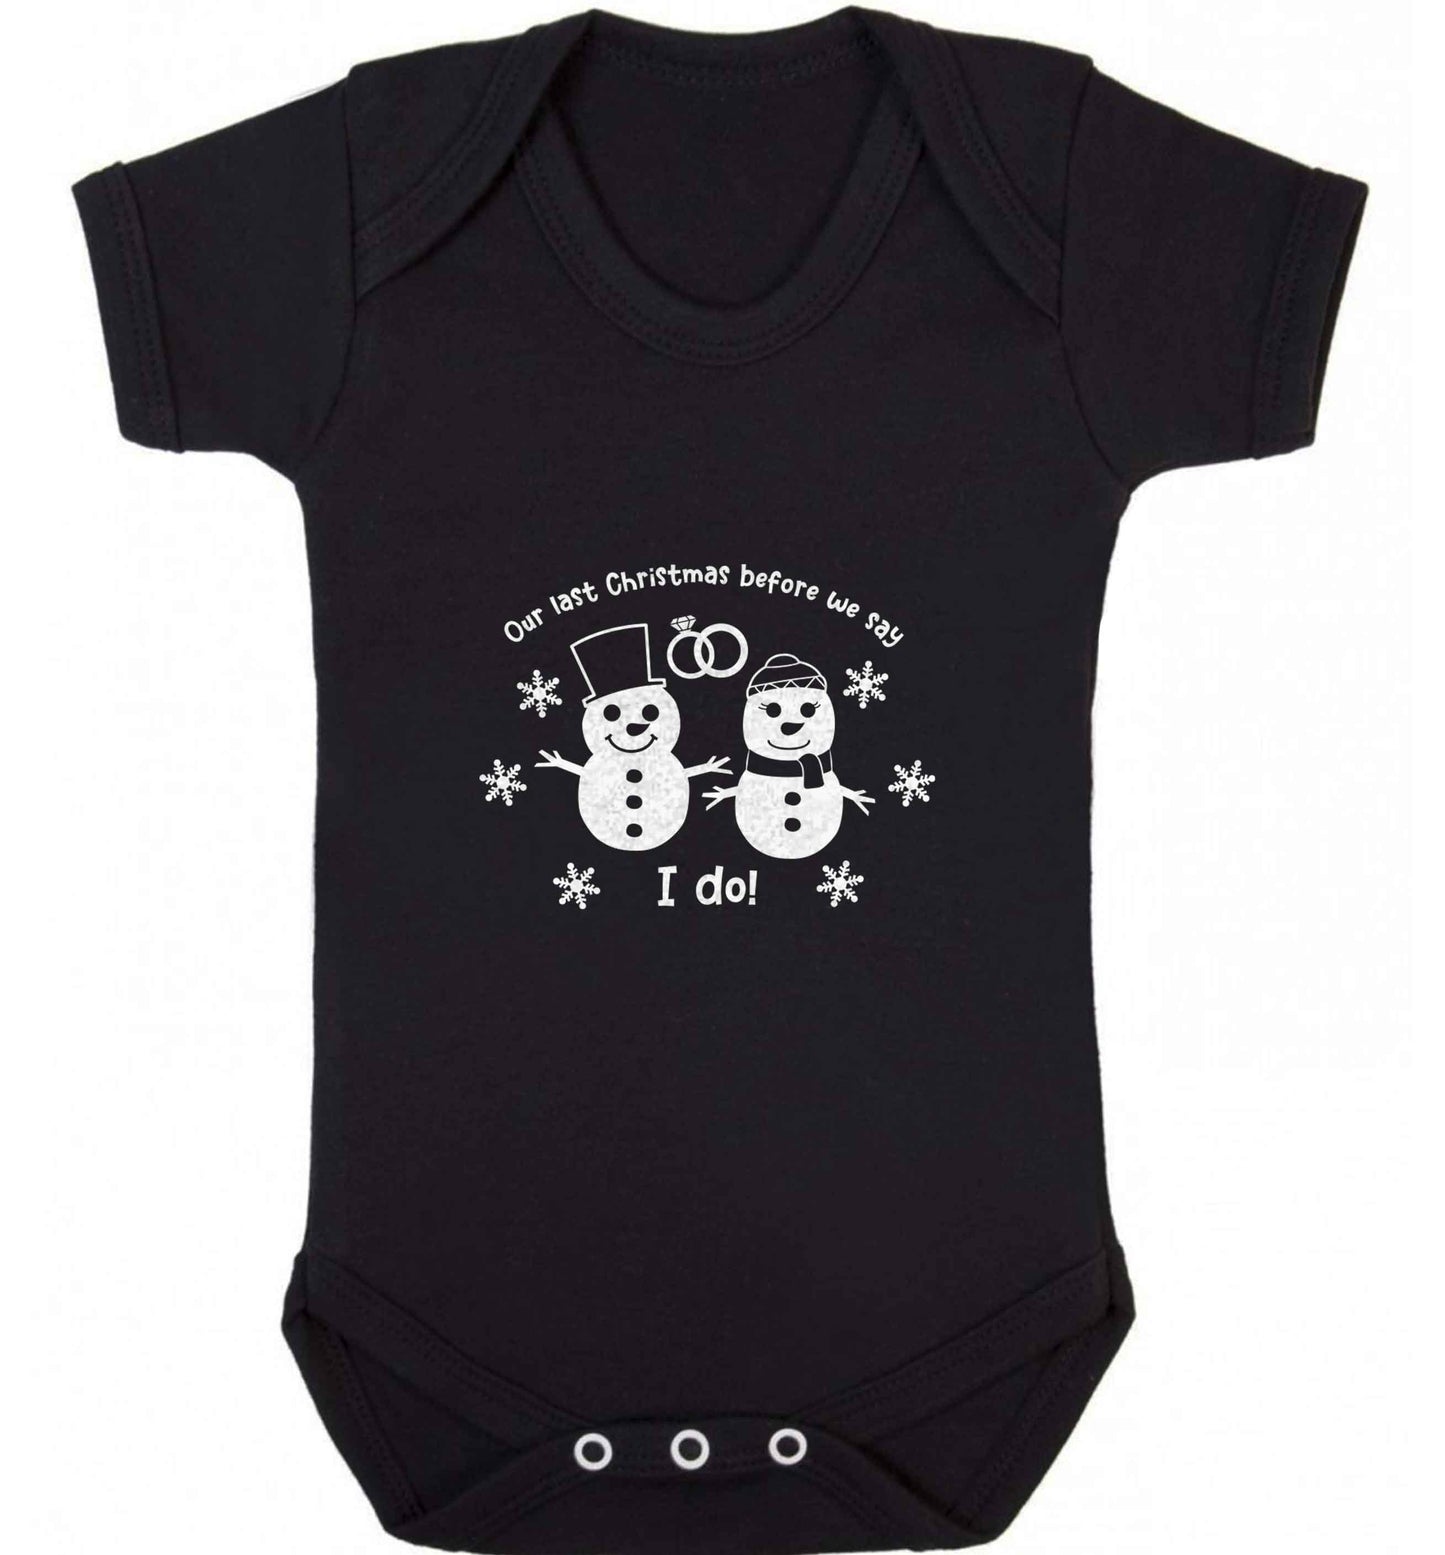 Last Christmas before we say I do baby vest black 18-24 months